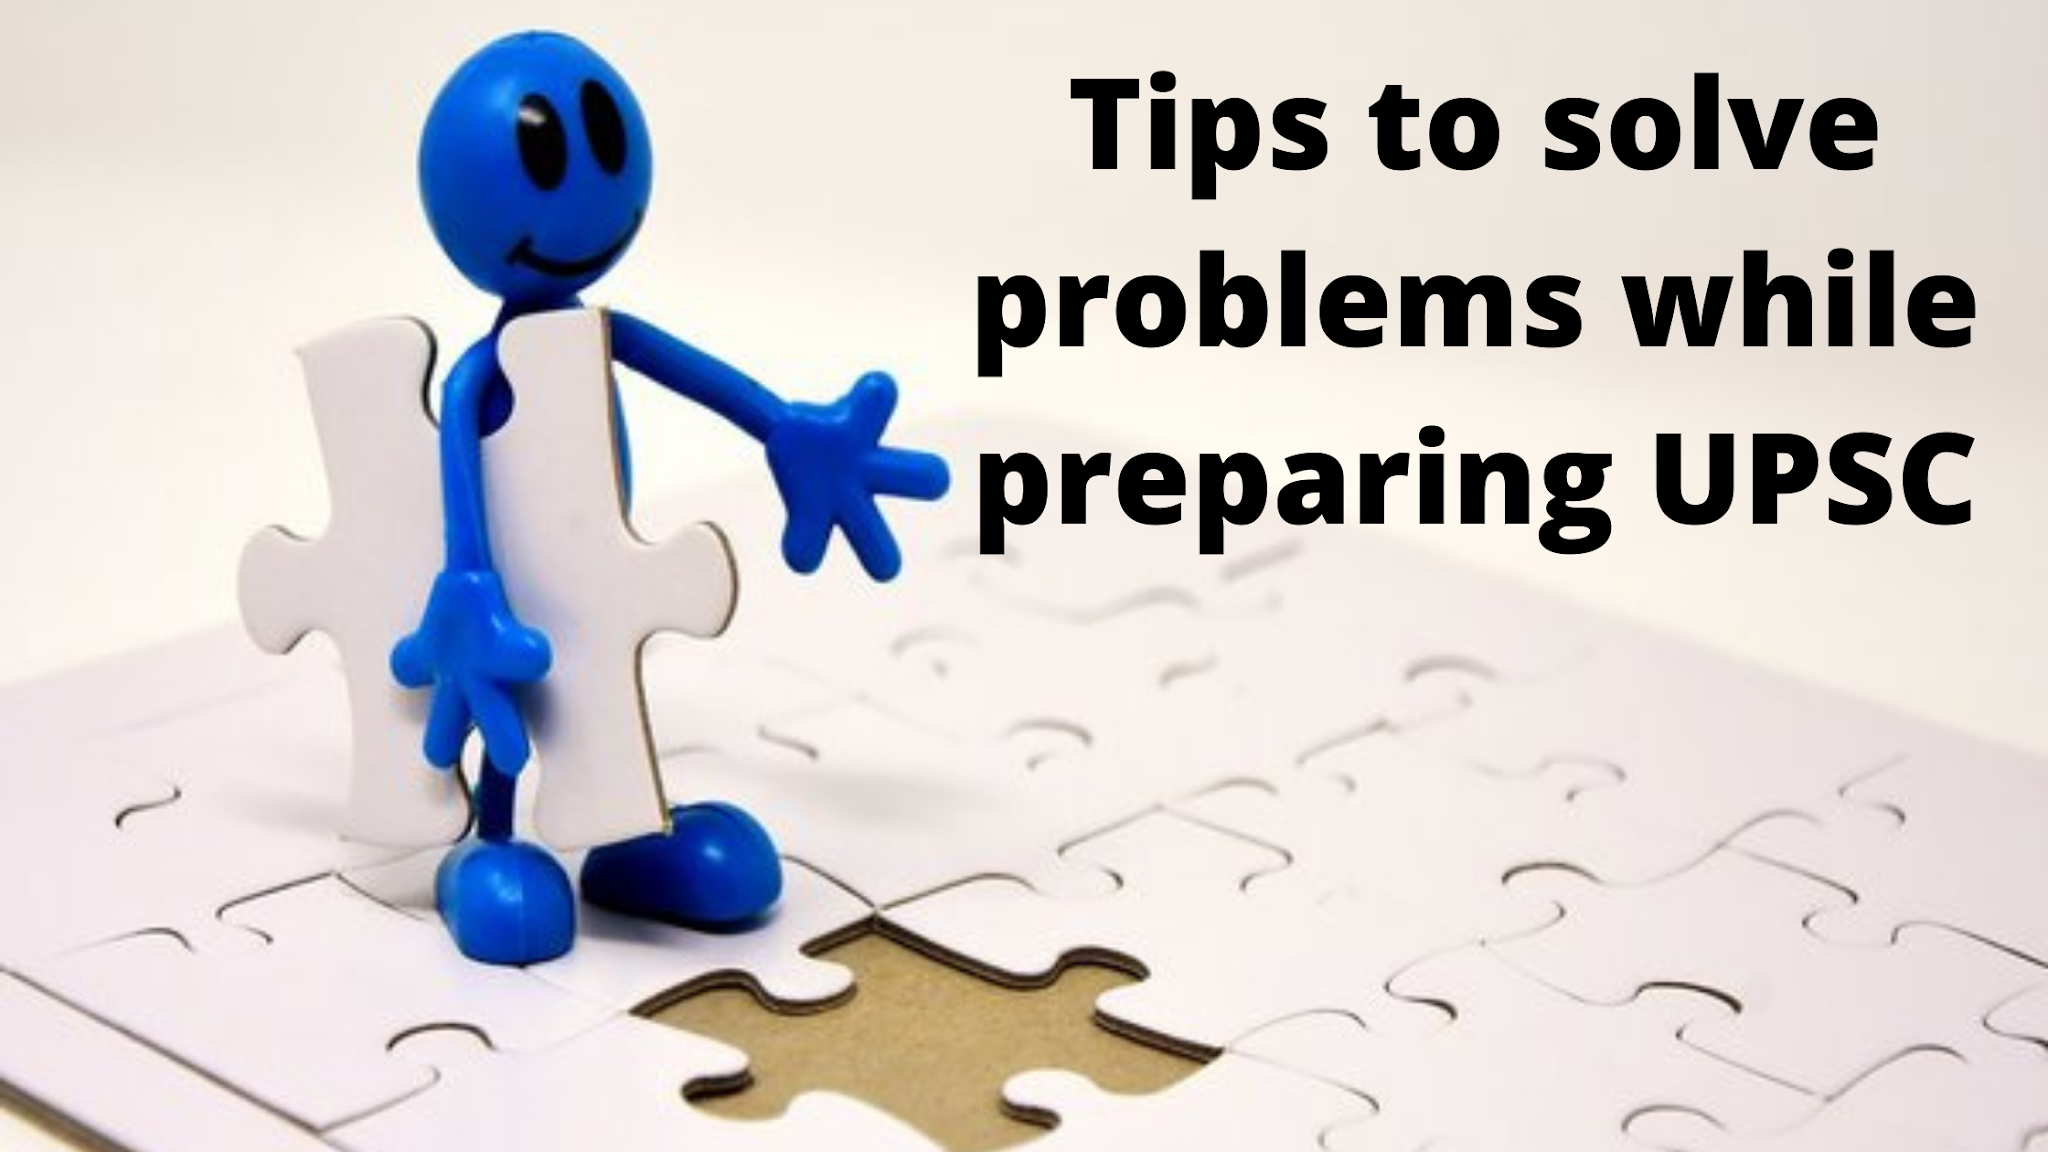 Tips to solve problems while preparing UPSC